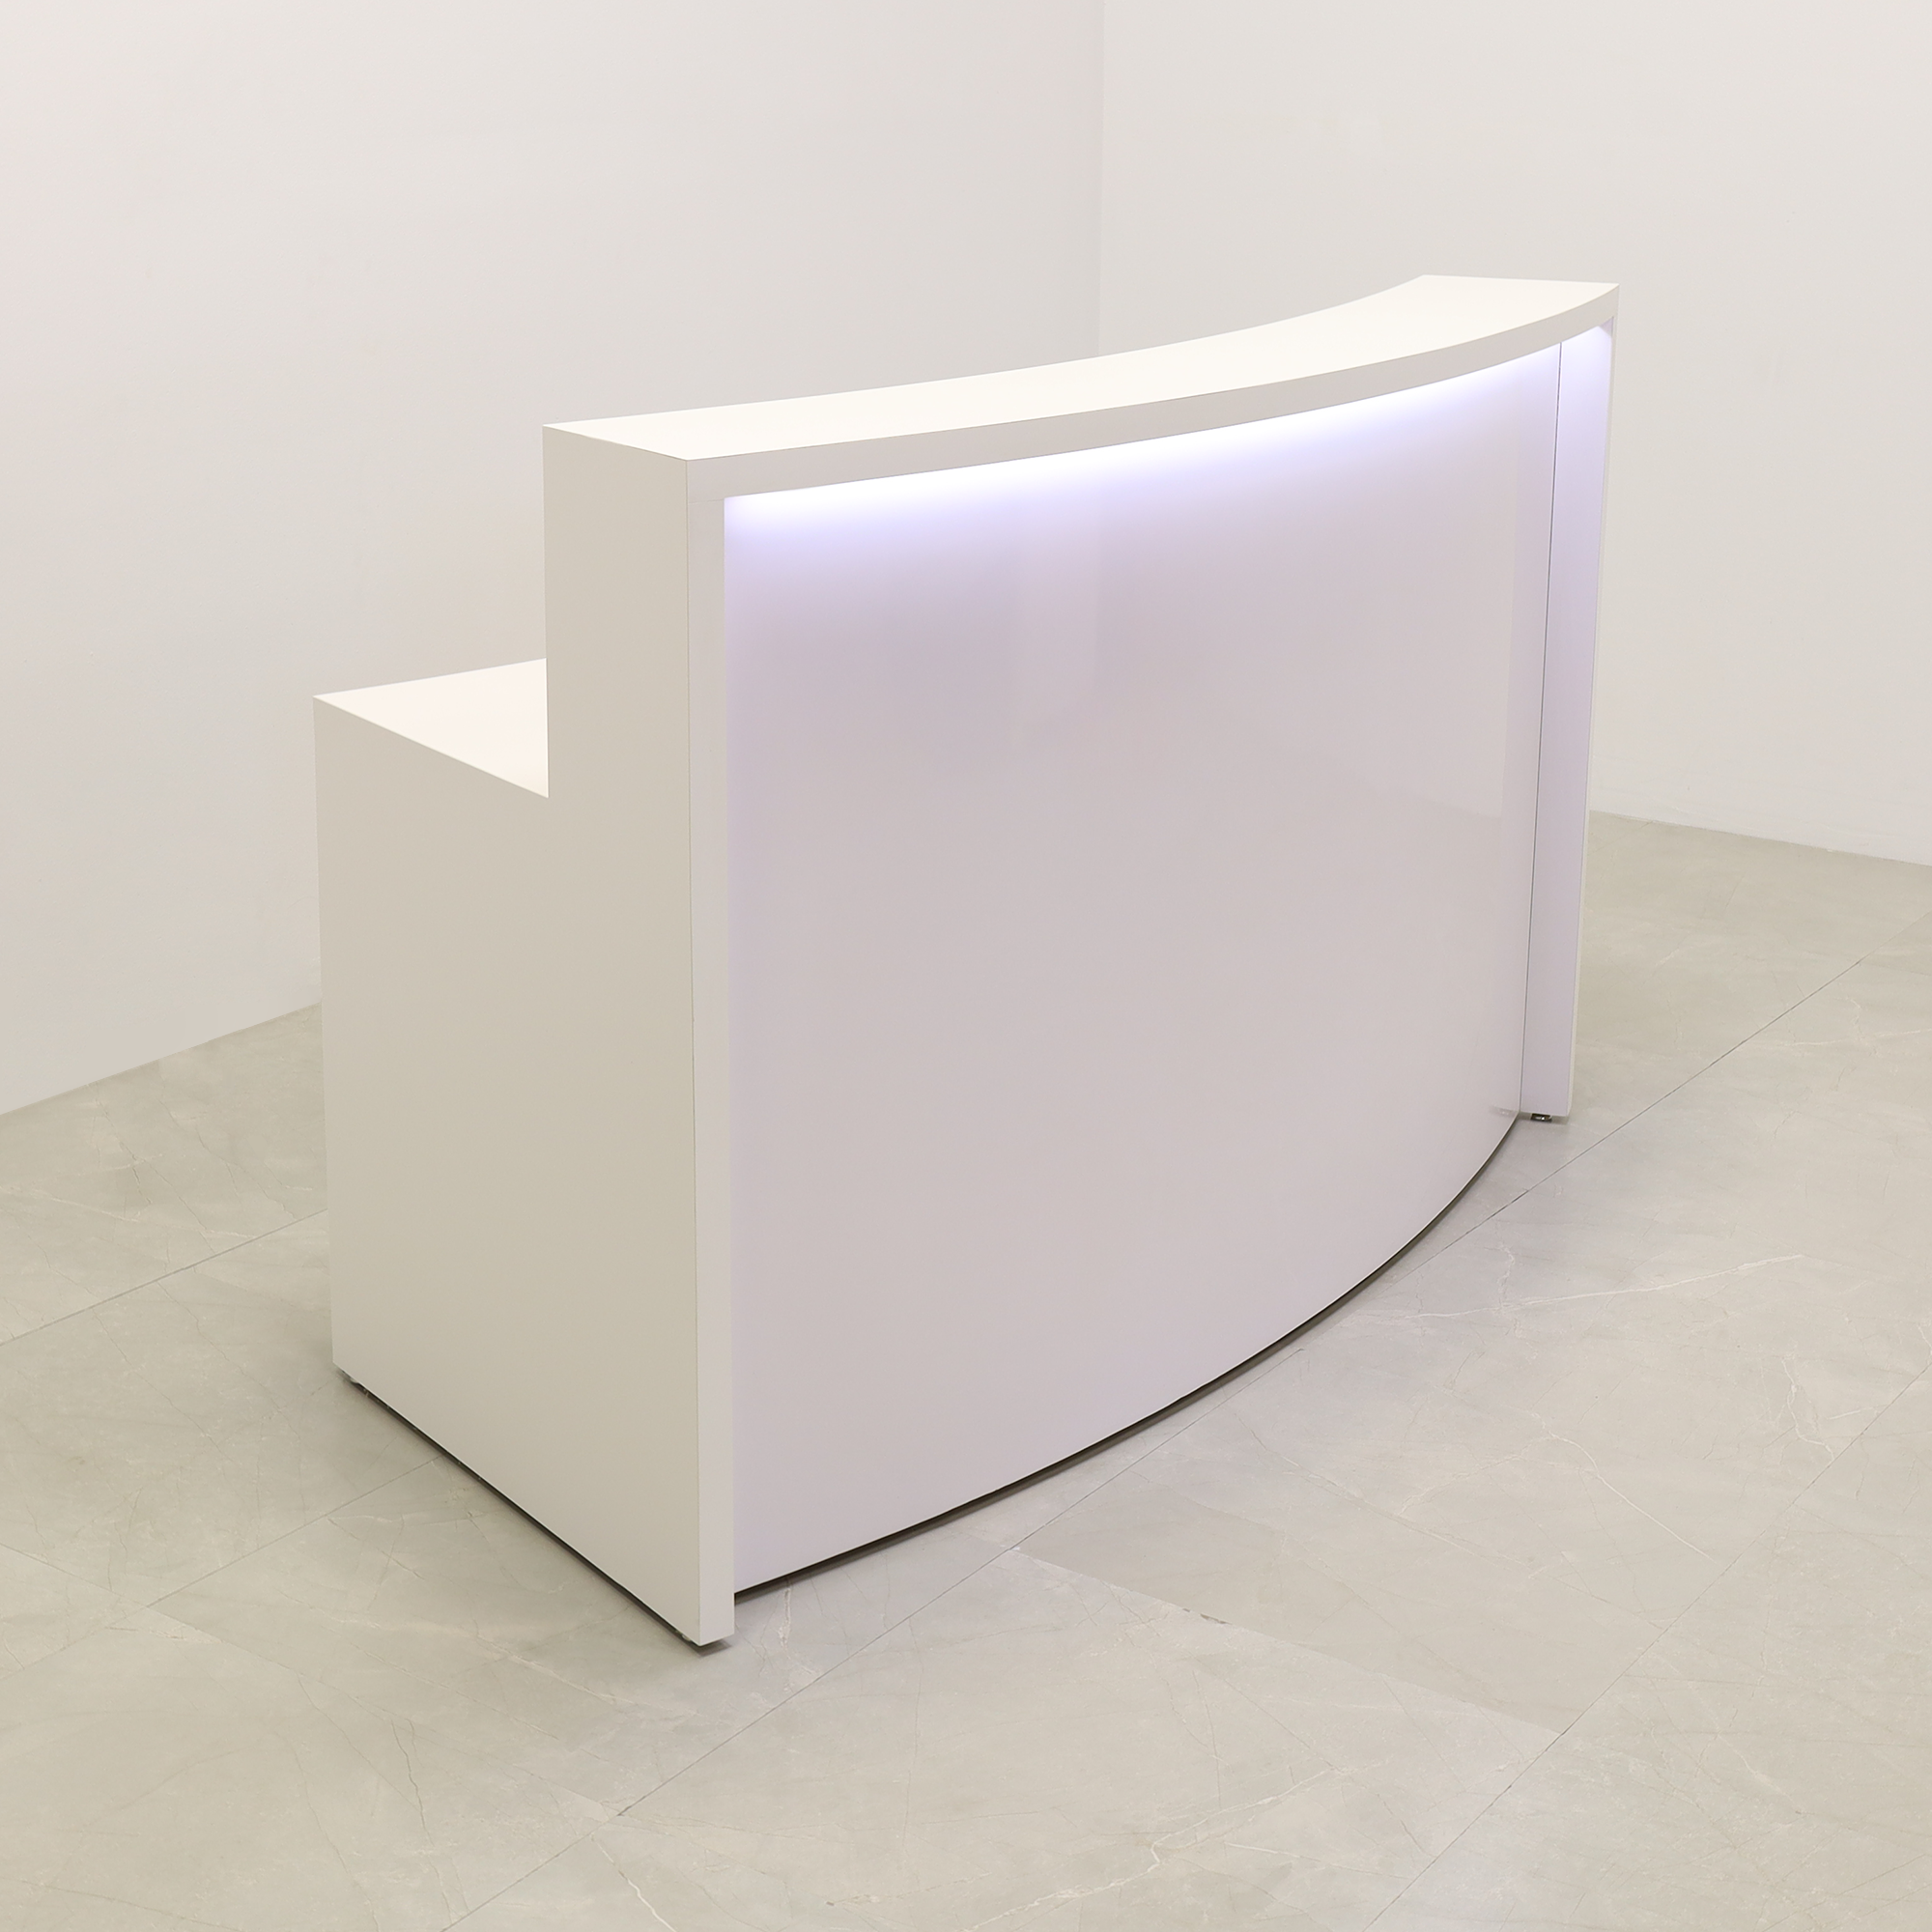 72-inch Seattle X1 Custom Reception Desk in white matte laminate desk and curved front panel, with white LED, shown here.